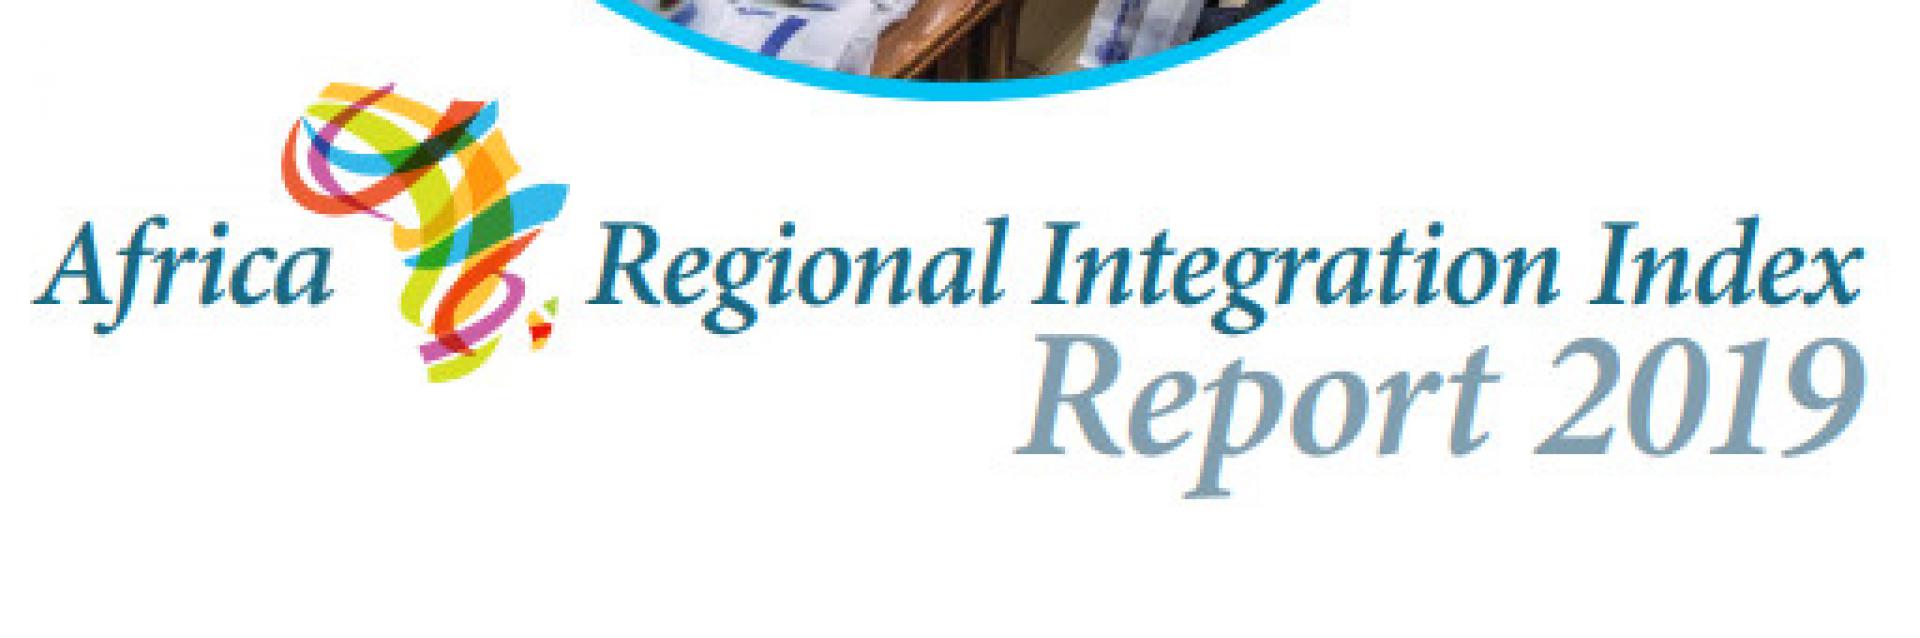 Africa Regional Integration Index calls on continent to build more resilient economies through integration